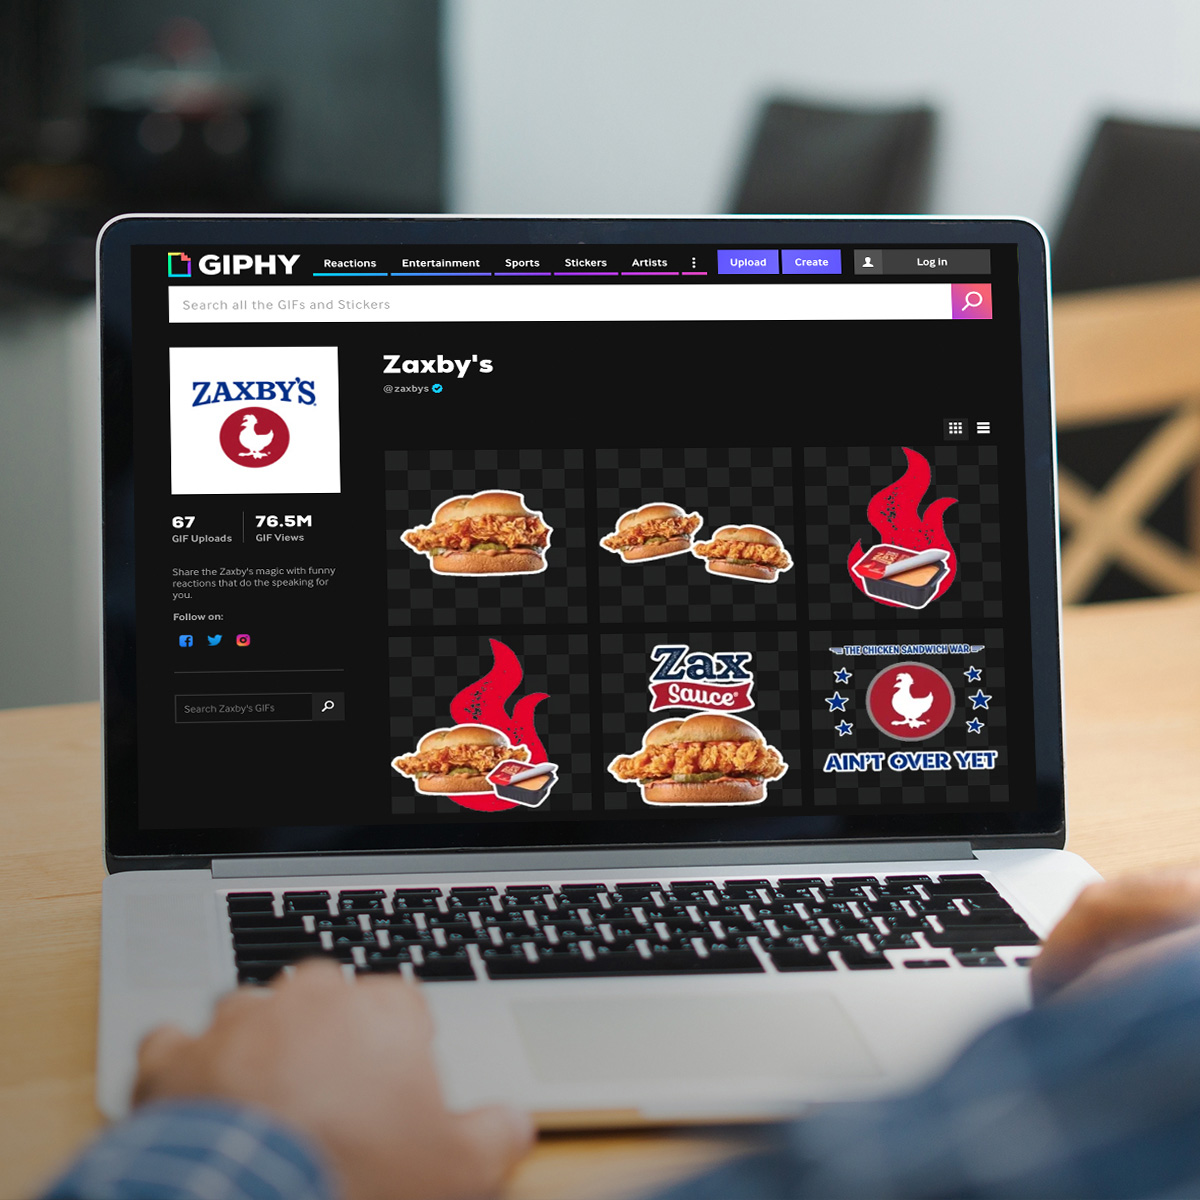 Zaxby’s has created a series of saucy Giphy stickers so Signature Sandwich supporters can share their experiences via Instagram Stories.